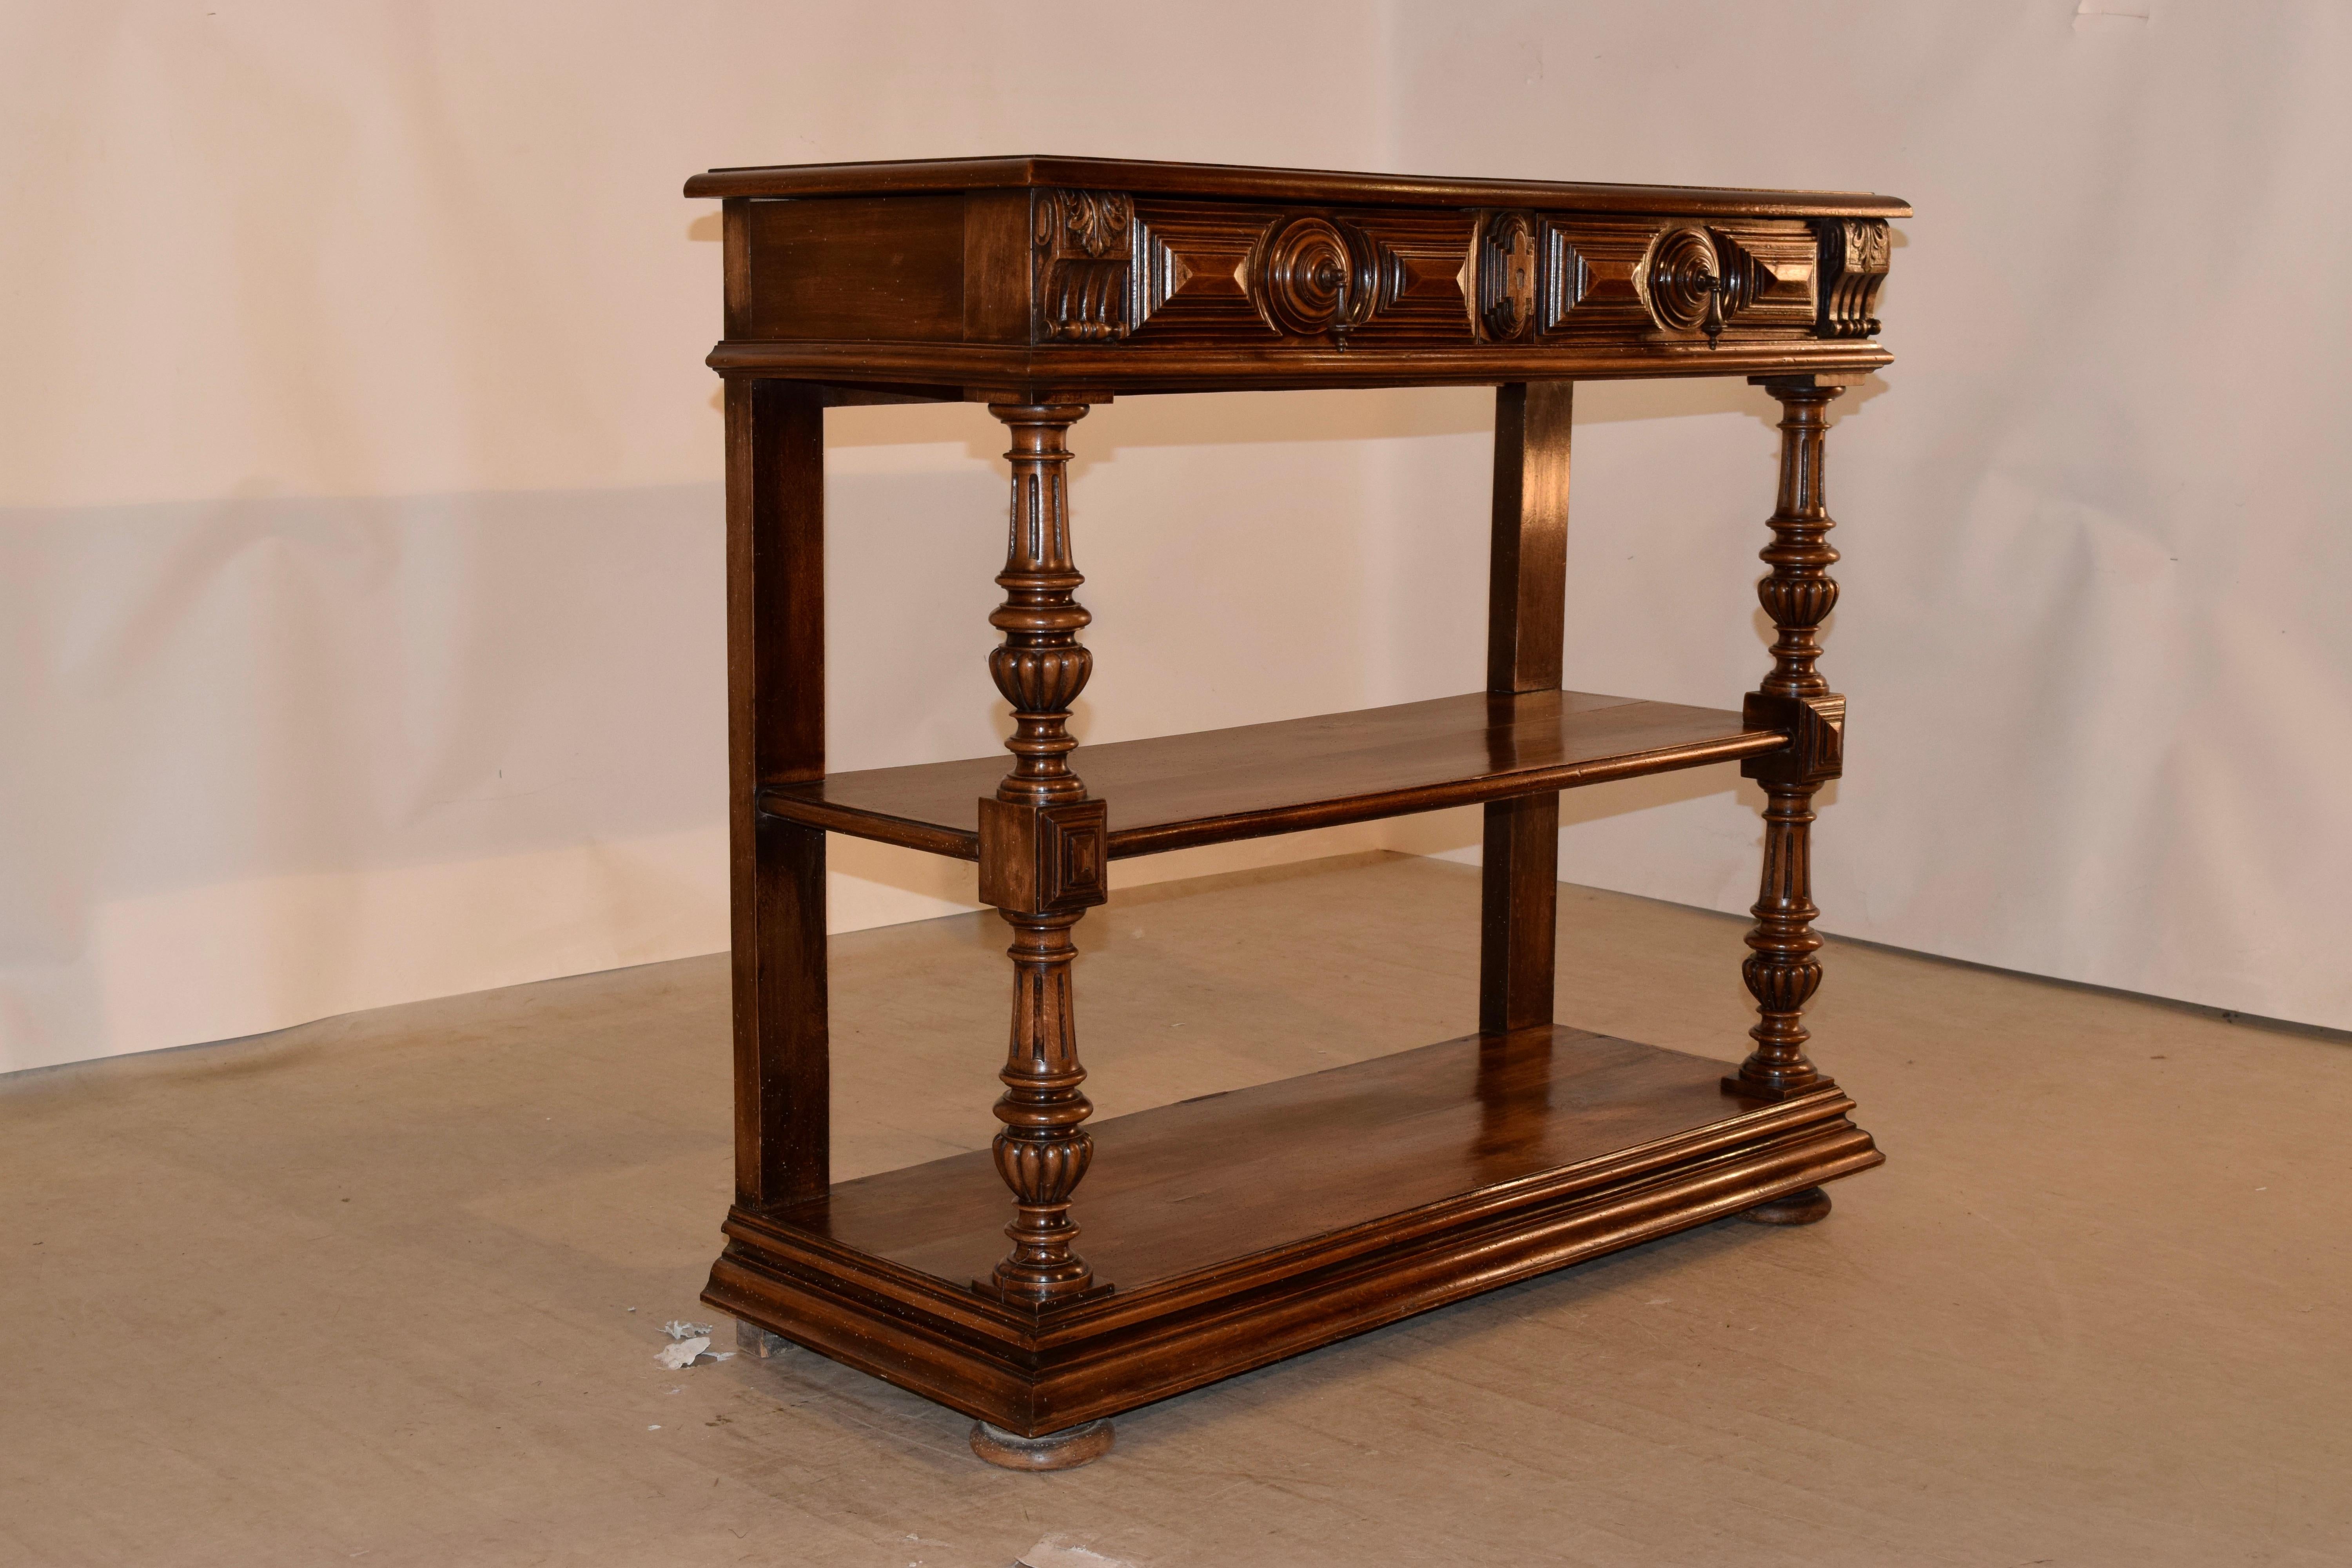 19th century French walnut buffet with a banded top which also has a beveled edge. This follows down to two paneled drawers over two lower shelves. The shelf supports are wonderfully hand turned and carved in the front, and are simple in the back